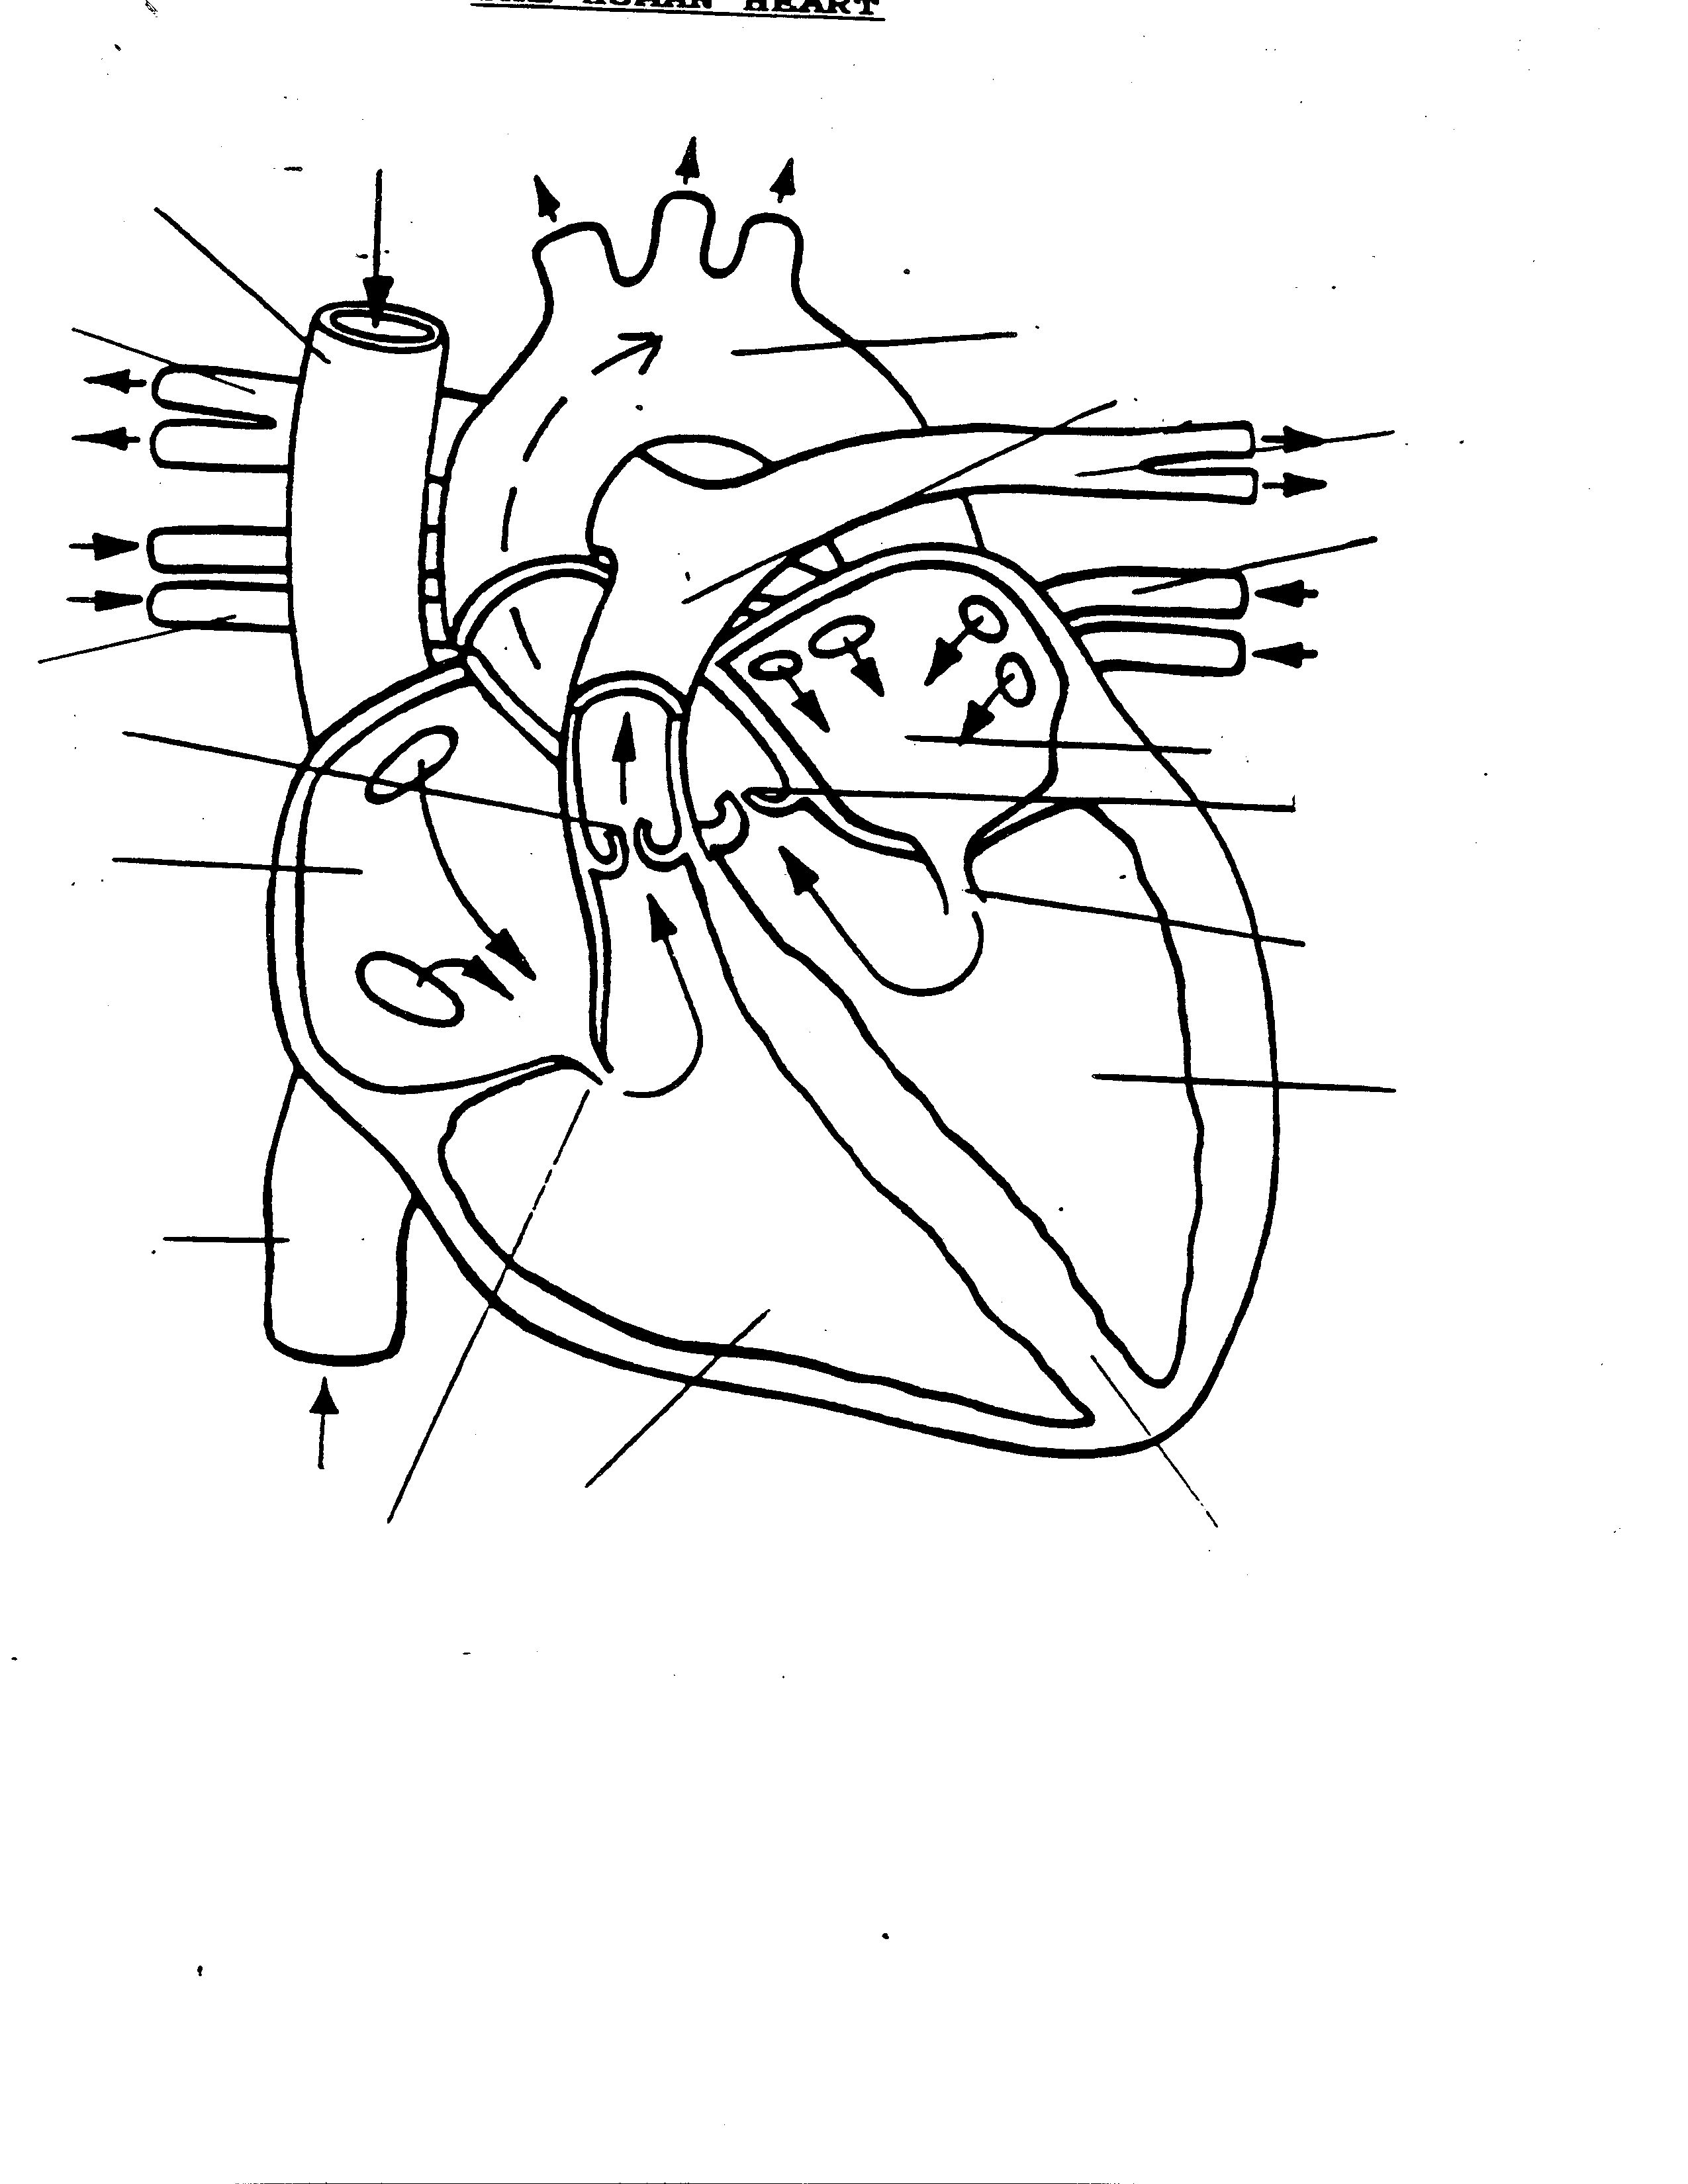 The Heart Diagram Black And White Hart Diagram Human Heart Diagram Black And White